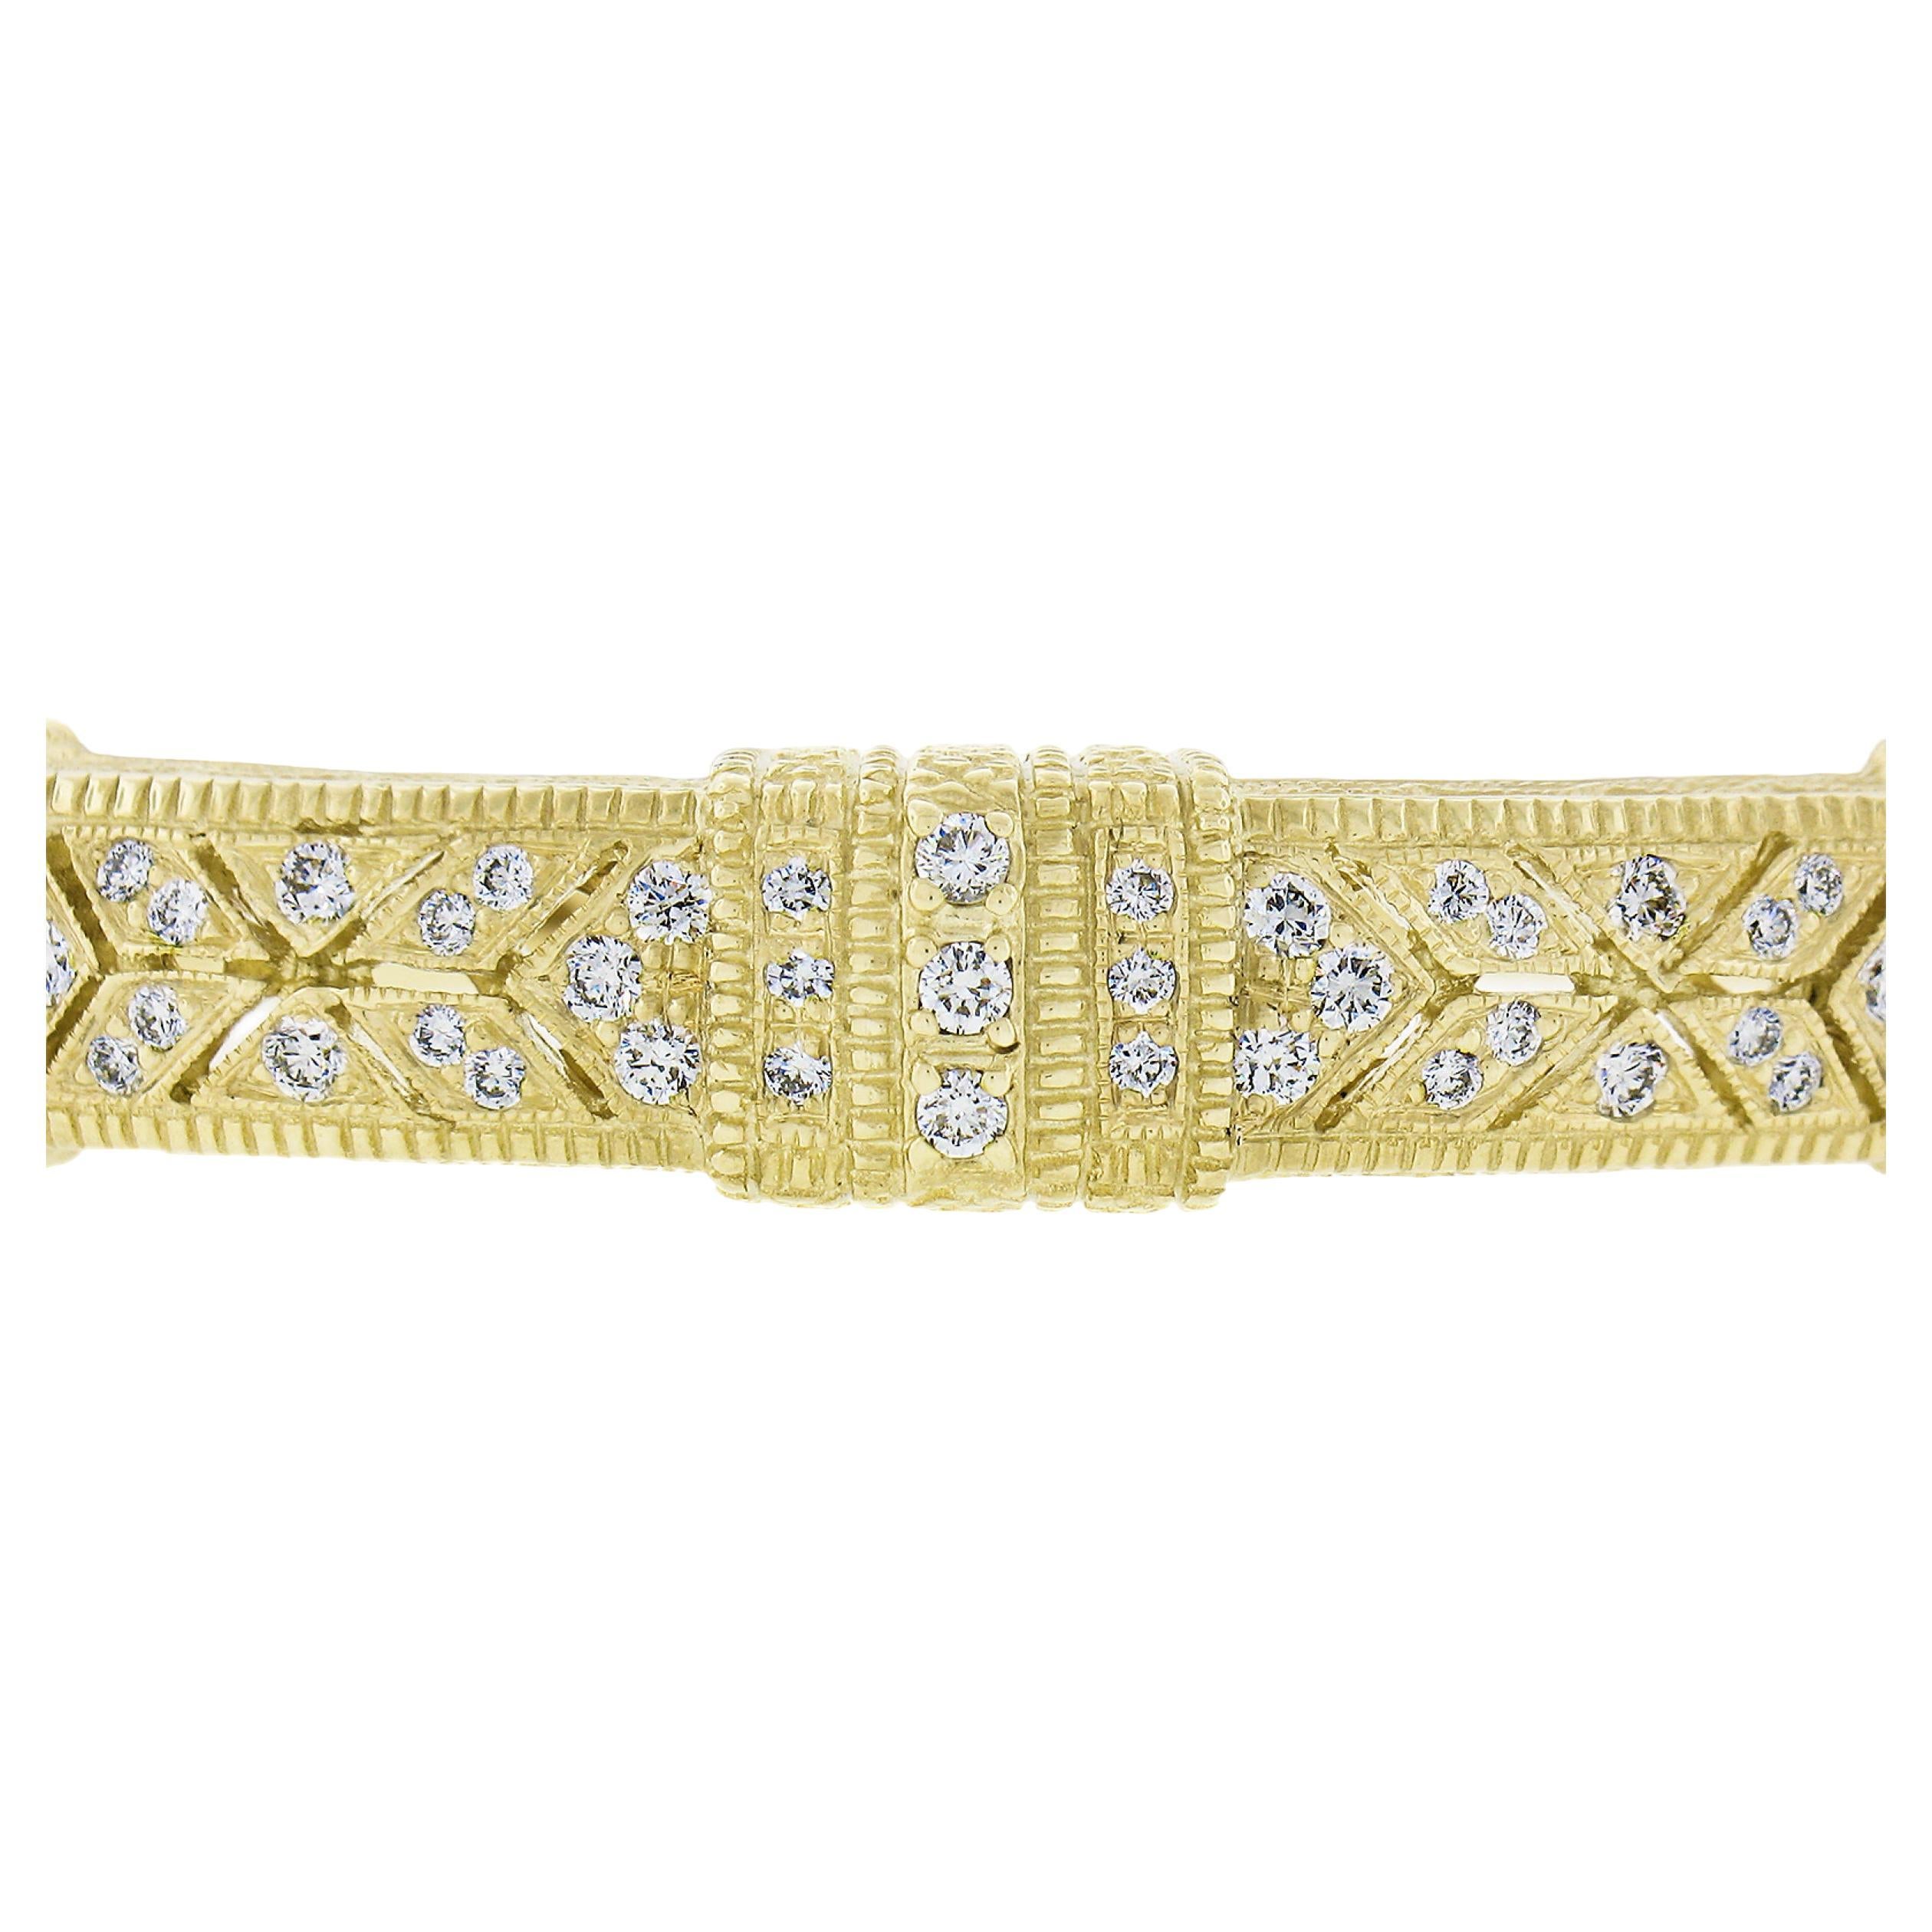 --Stone(s):--
114 Natural Genuine Diamonds - Round Brilliant Cut - Pave Set - VS1/VS2 Color- F/G Color - 1.05ctw approx.

Material: Solid 18k Yellow Gold
Weight: 50.14 Grams
Length: will comfortably fit up to a 6.5 inch wrist fitted on a